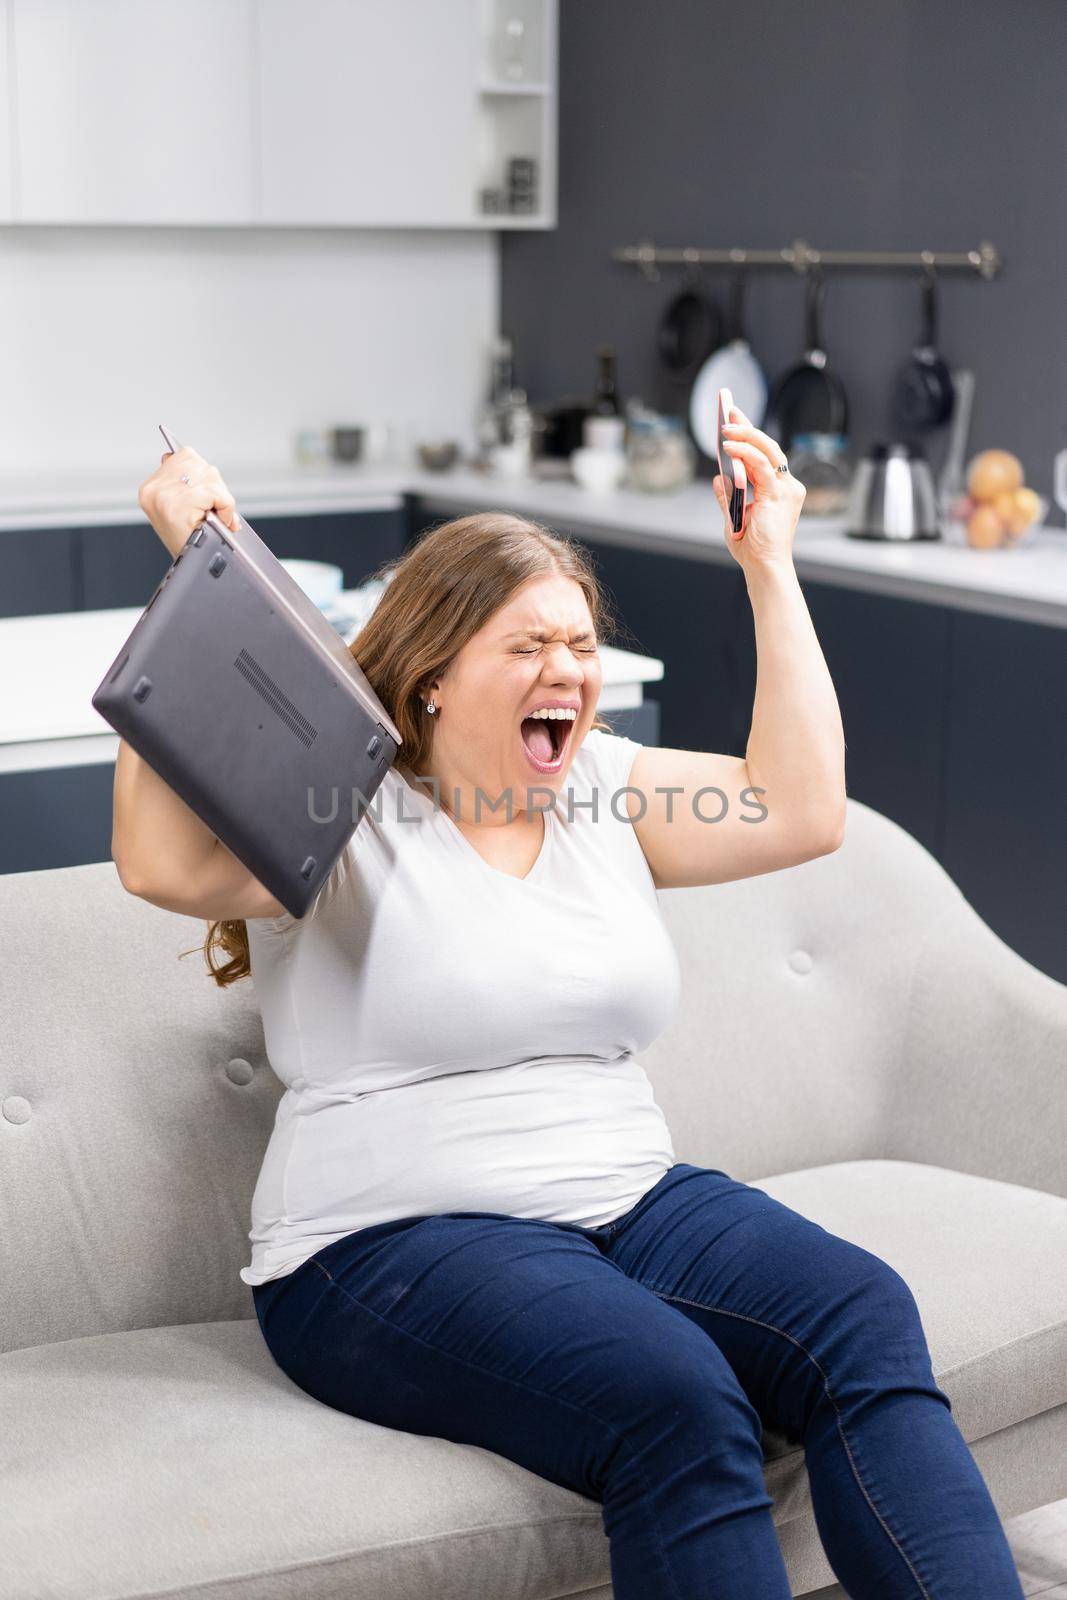 Fury, rage, anger with laptop in hand young overweight girl staying at home during quarantine. Self isolation as prevention. Work distantly concept. Facial expressions, emotions, feelings by LipikStockMedia